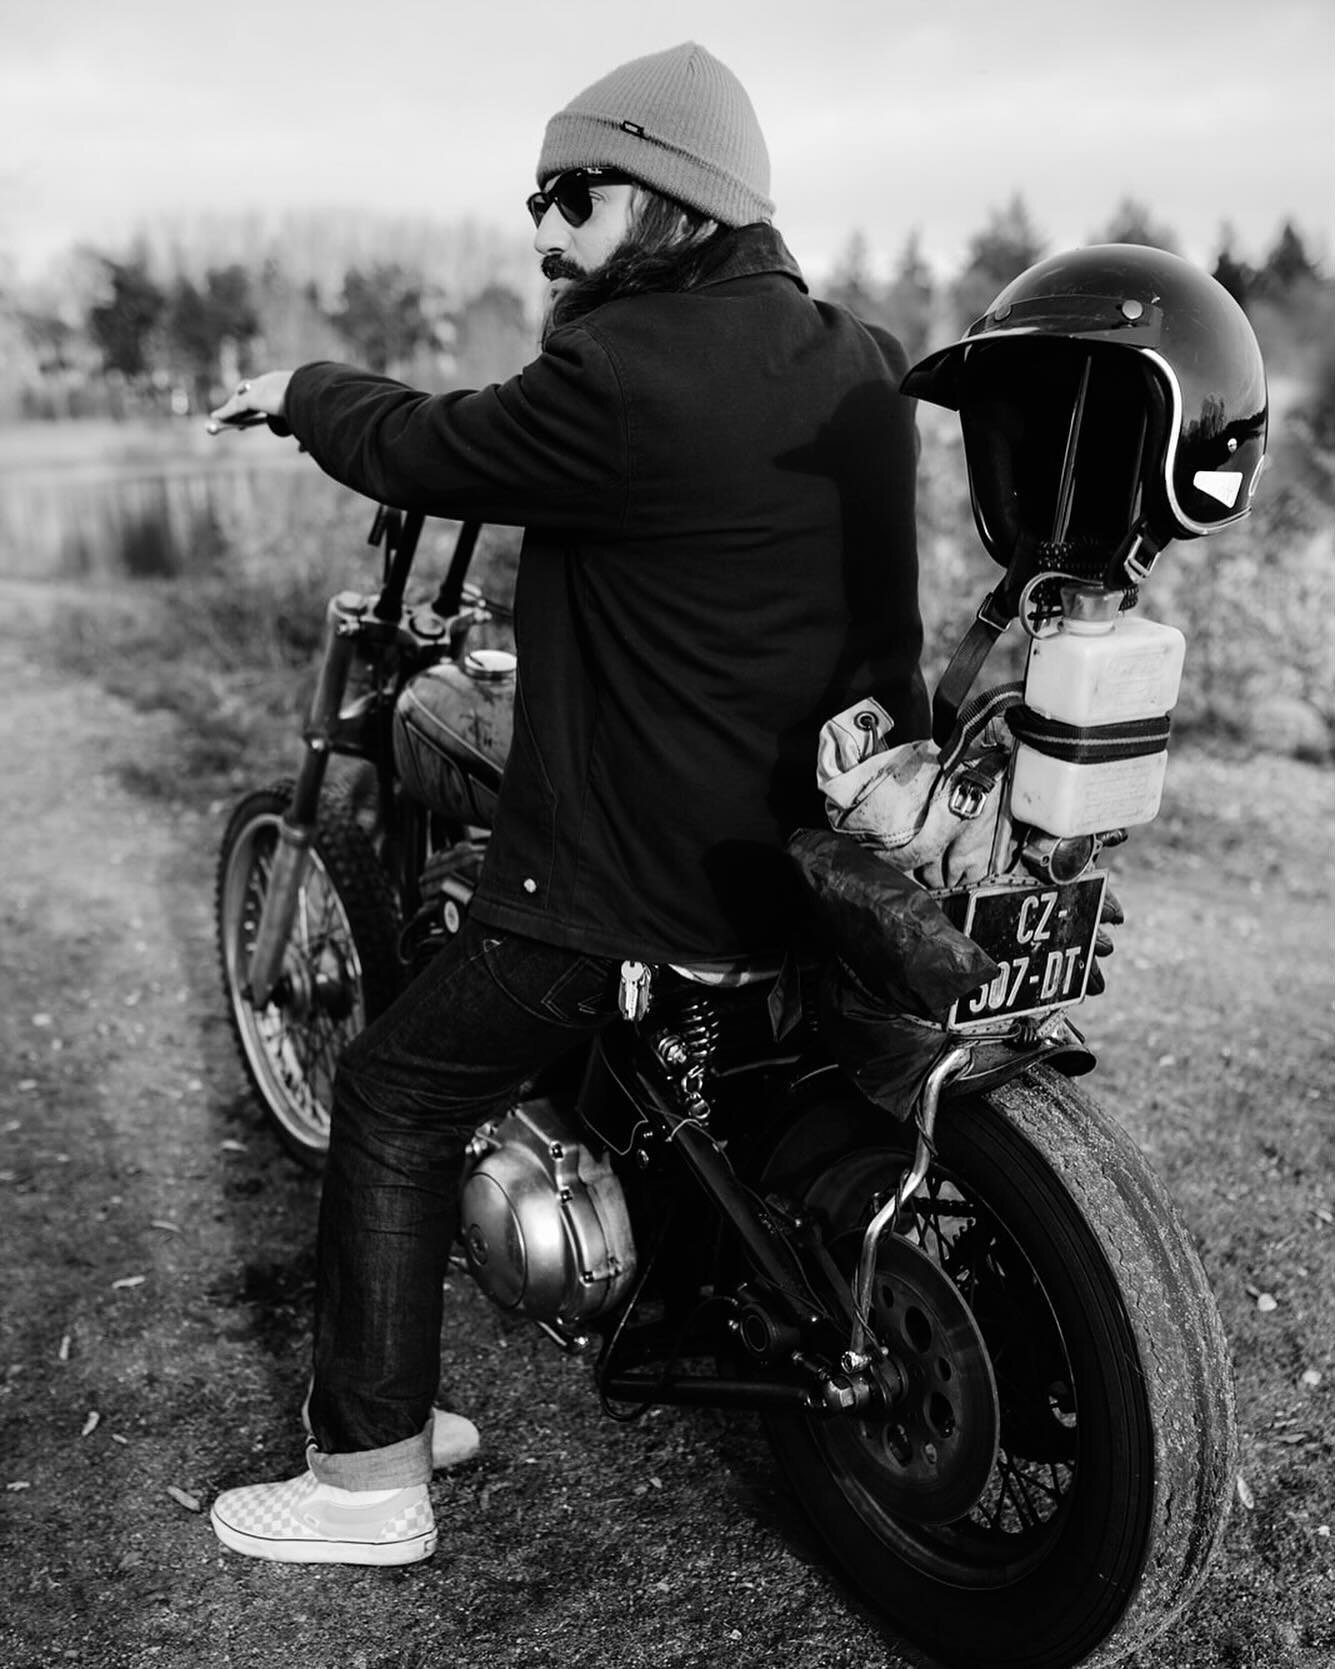 Open wide 🏍️

Bruzzy @amaury_cibot 
.
.
.
#chopperlife #chopperporn #roadtrip #hittheroad #harleydavidson #choppers #sportster #claireminuit #ridefast #adventure #explore #bikeride #motorcycle #wheels #ride #photography #moodyphotography #rider #lep